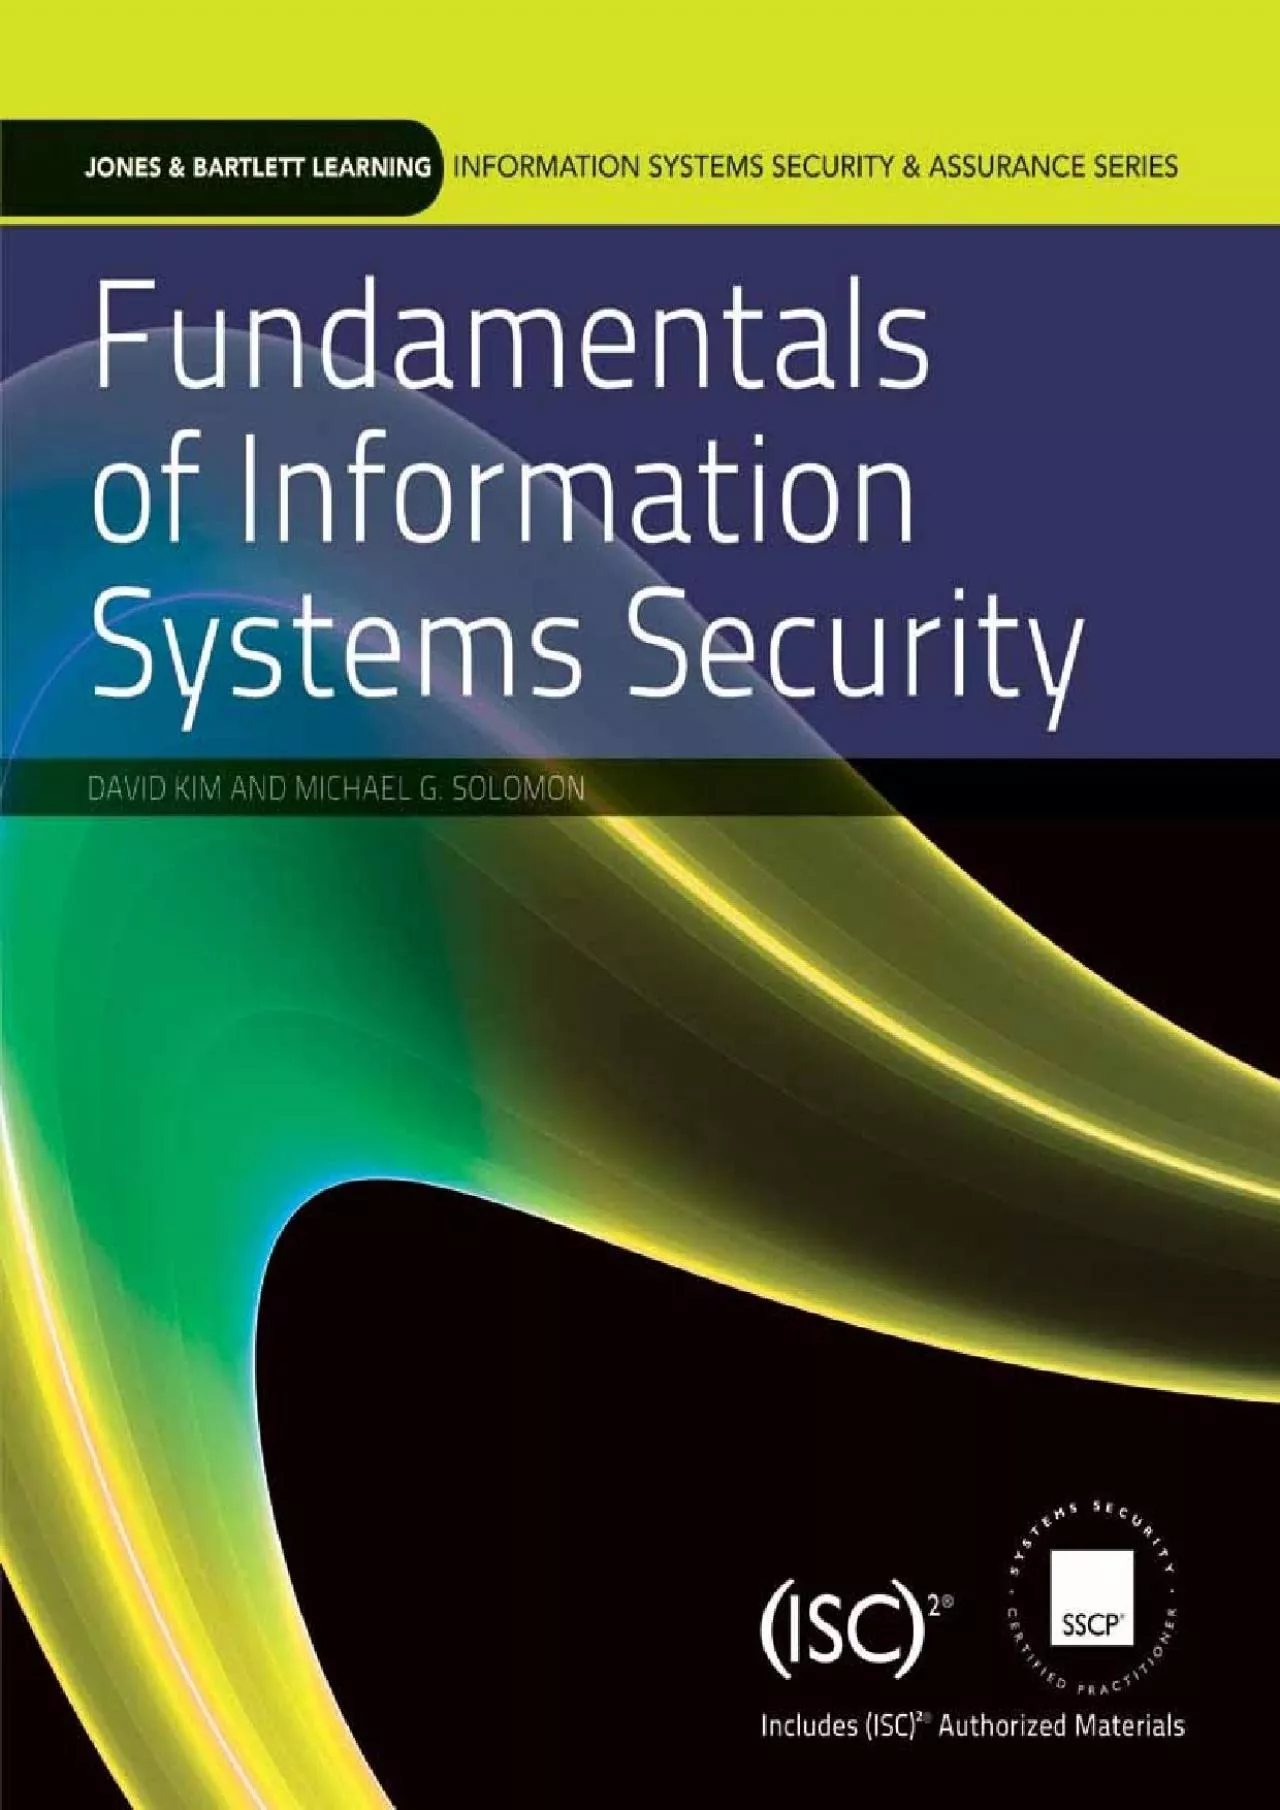 [READ]-Fundamentals of Information Systems Security (Information Systems Security  Assurance